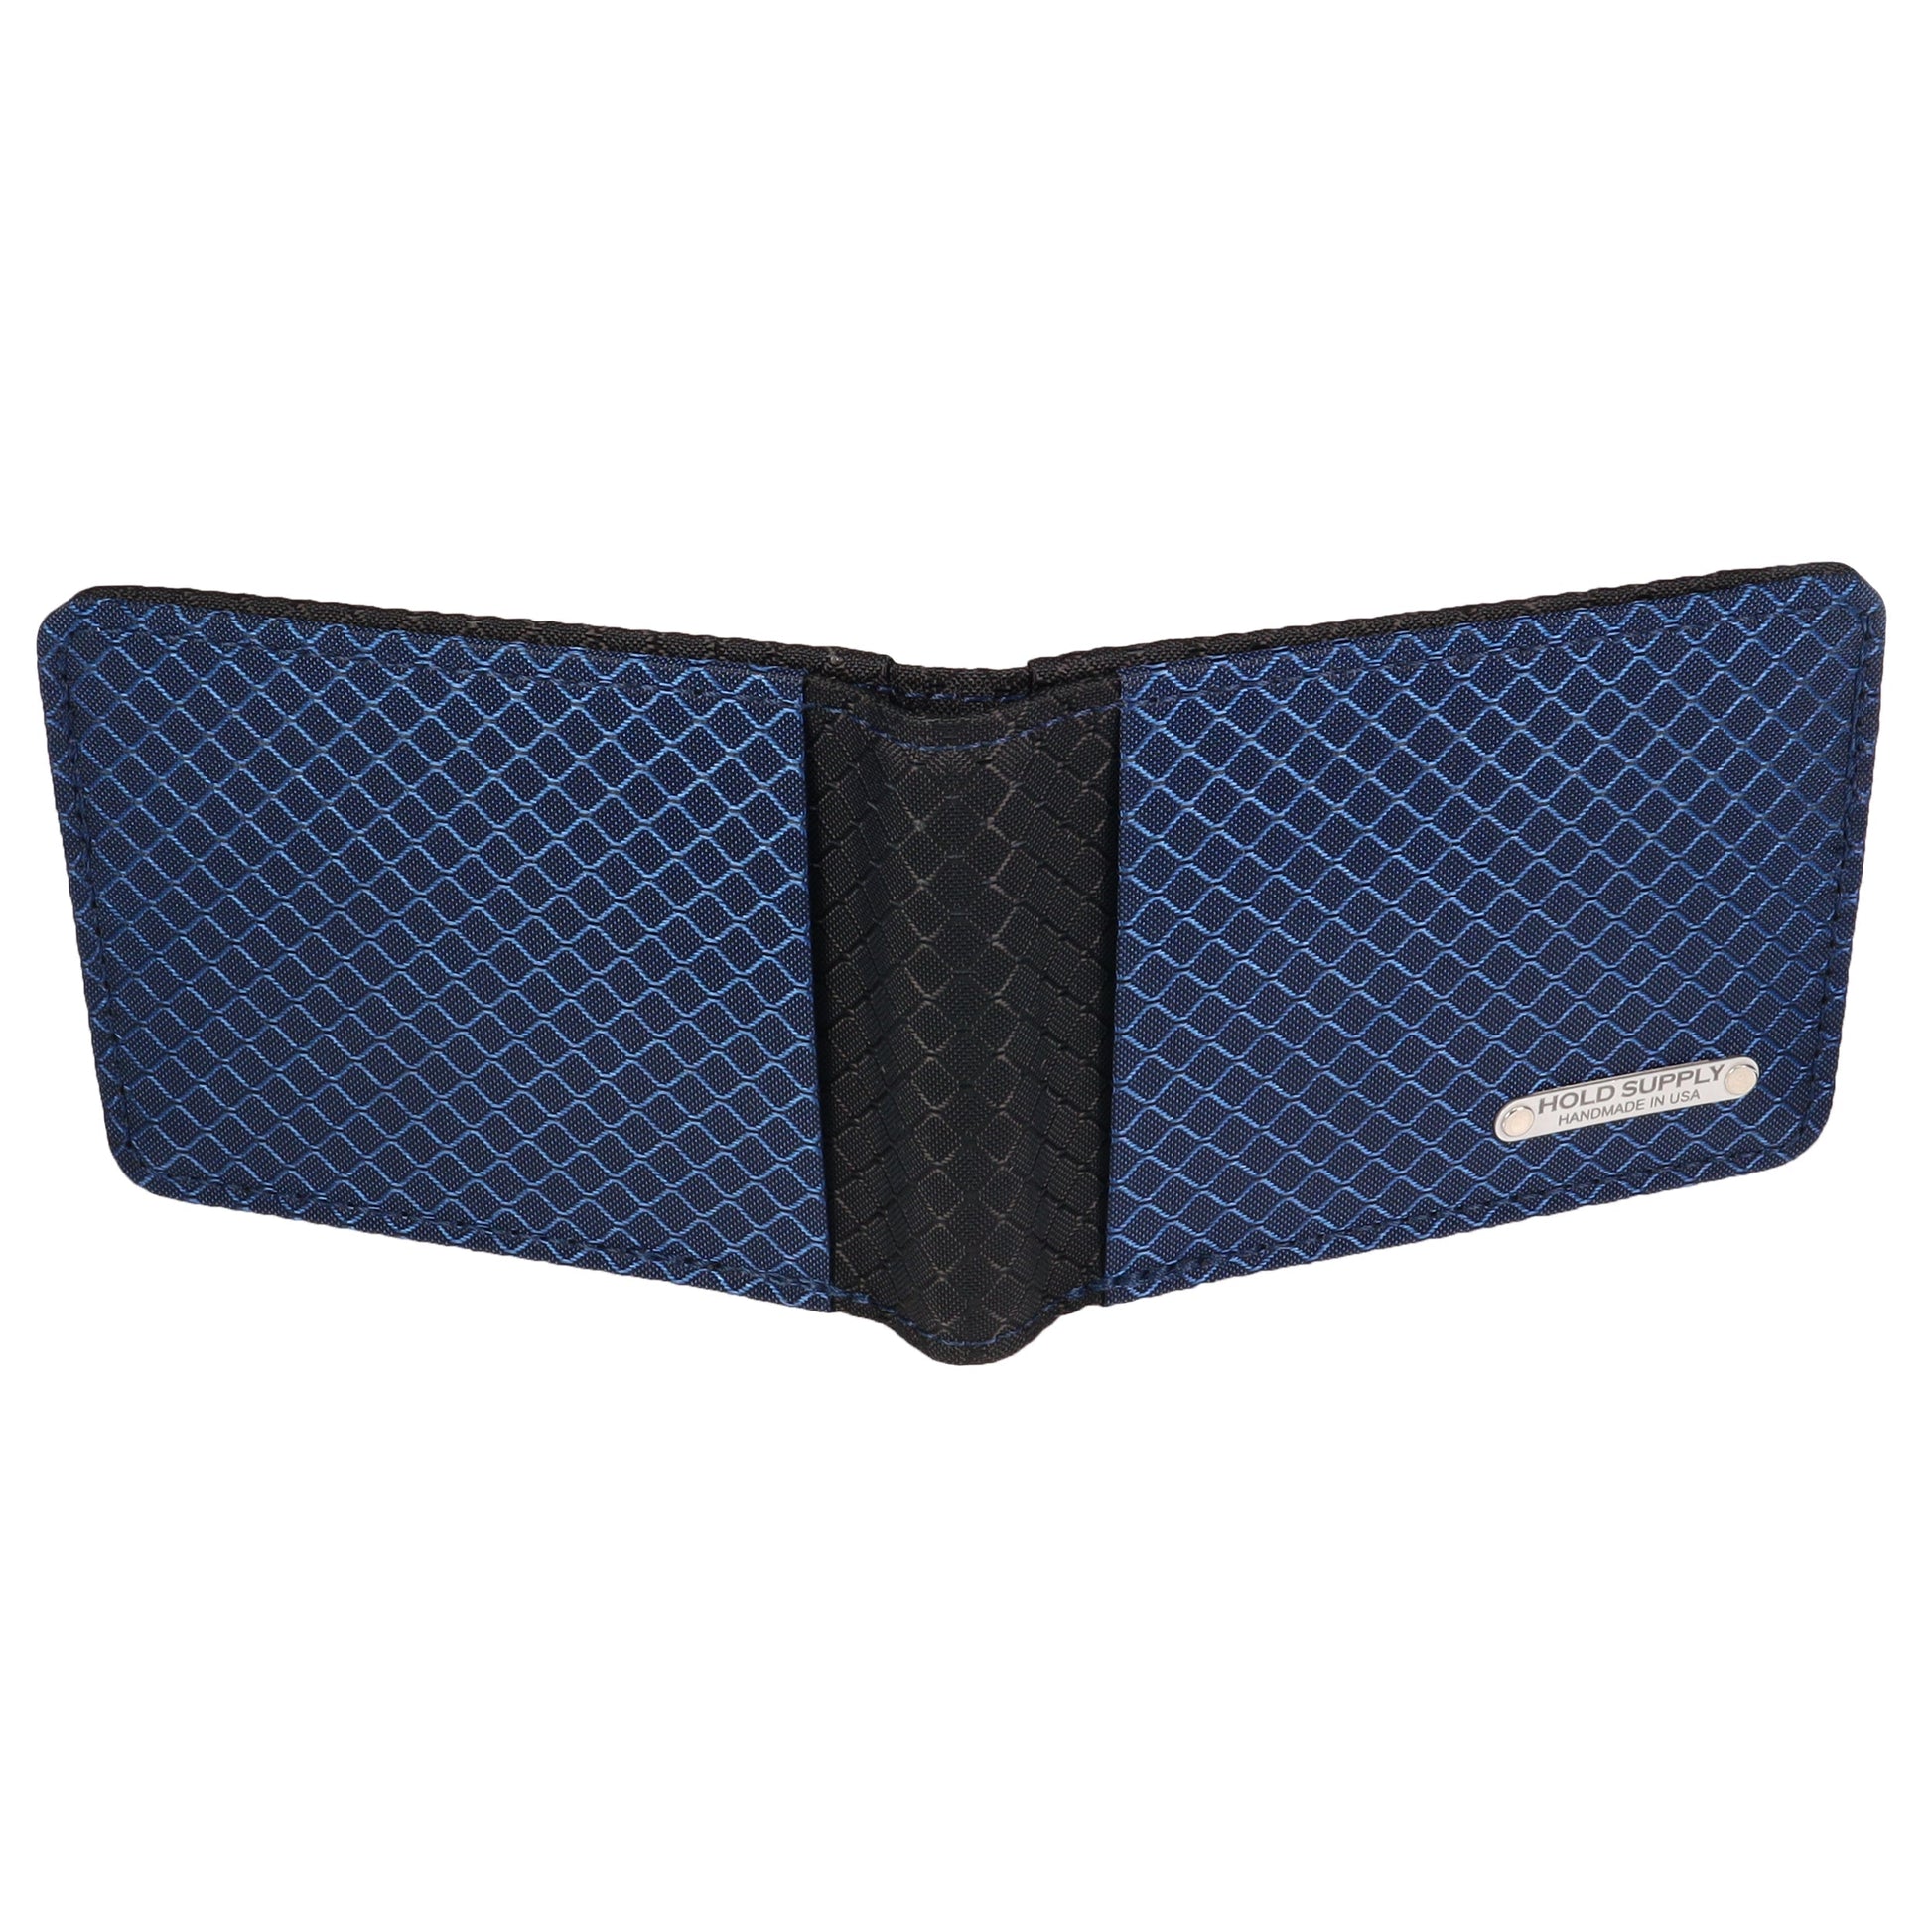 Navy Blue and Black Ripstop Fabric Wallet